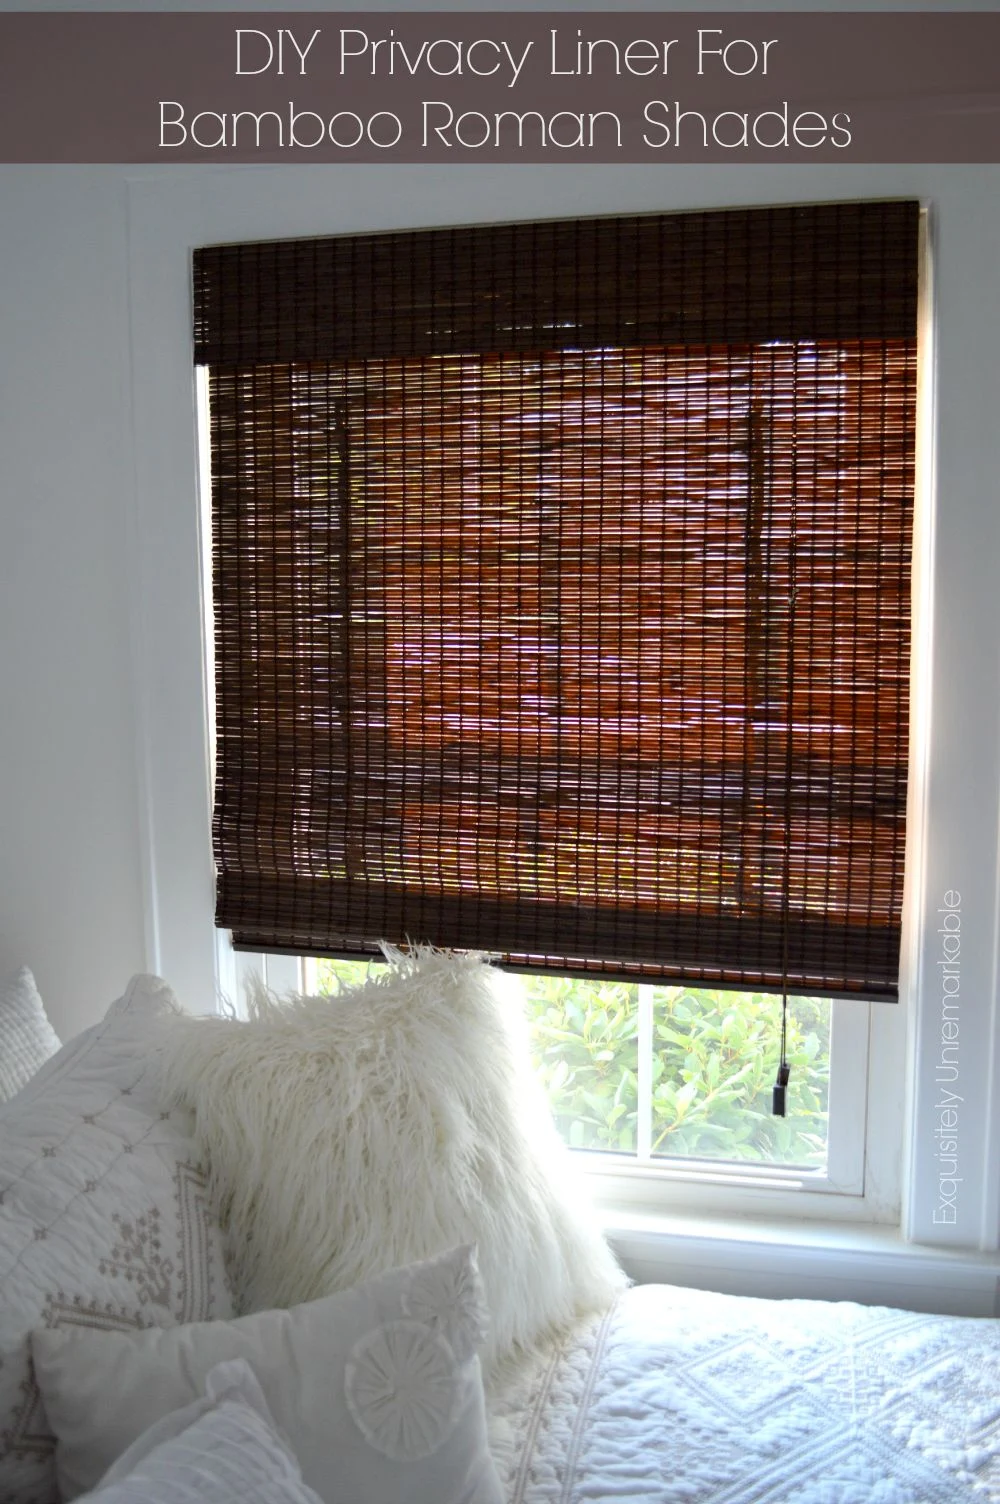 DIY privacy liner for bamboo roman shades